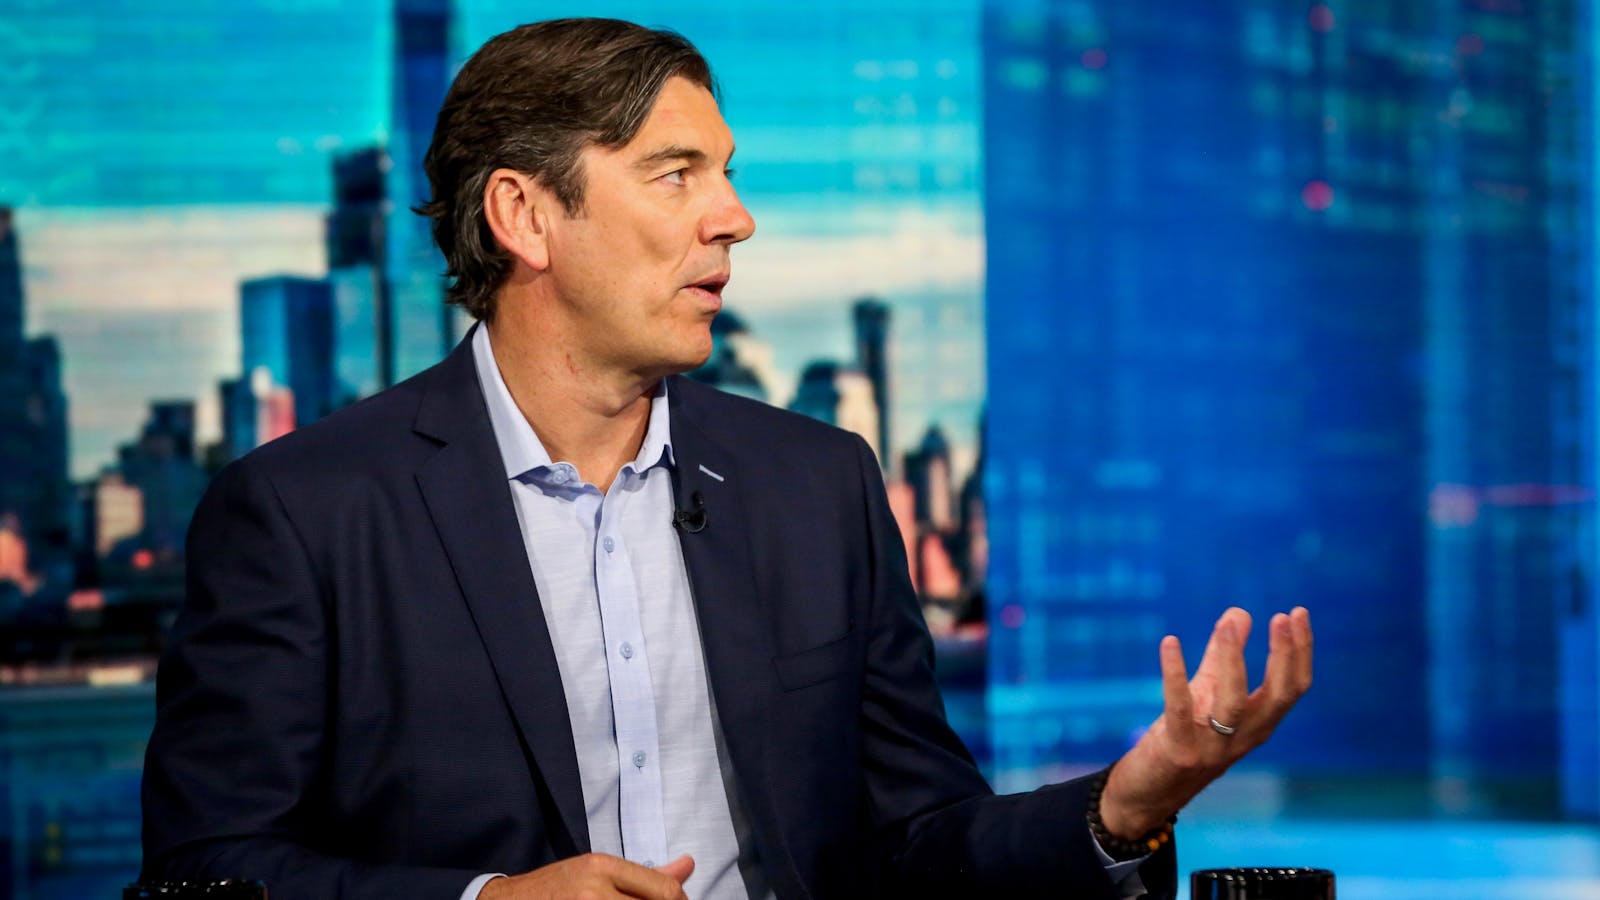 Oath CEO Tim Armstrong. Photo by Bloomberg